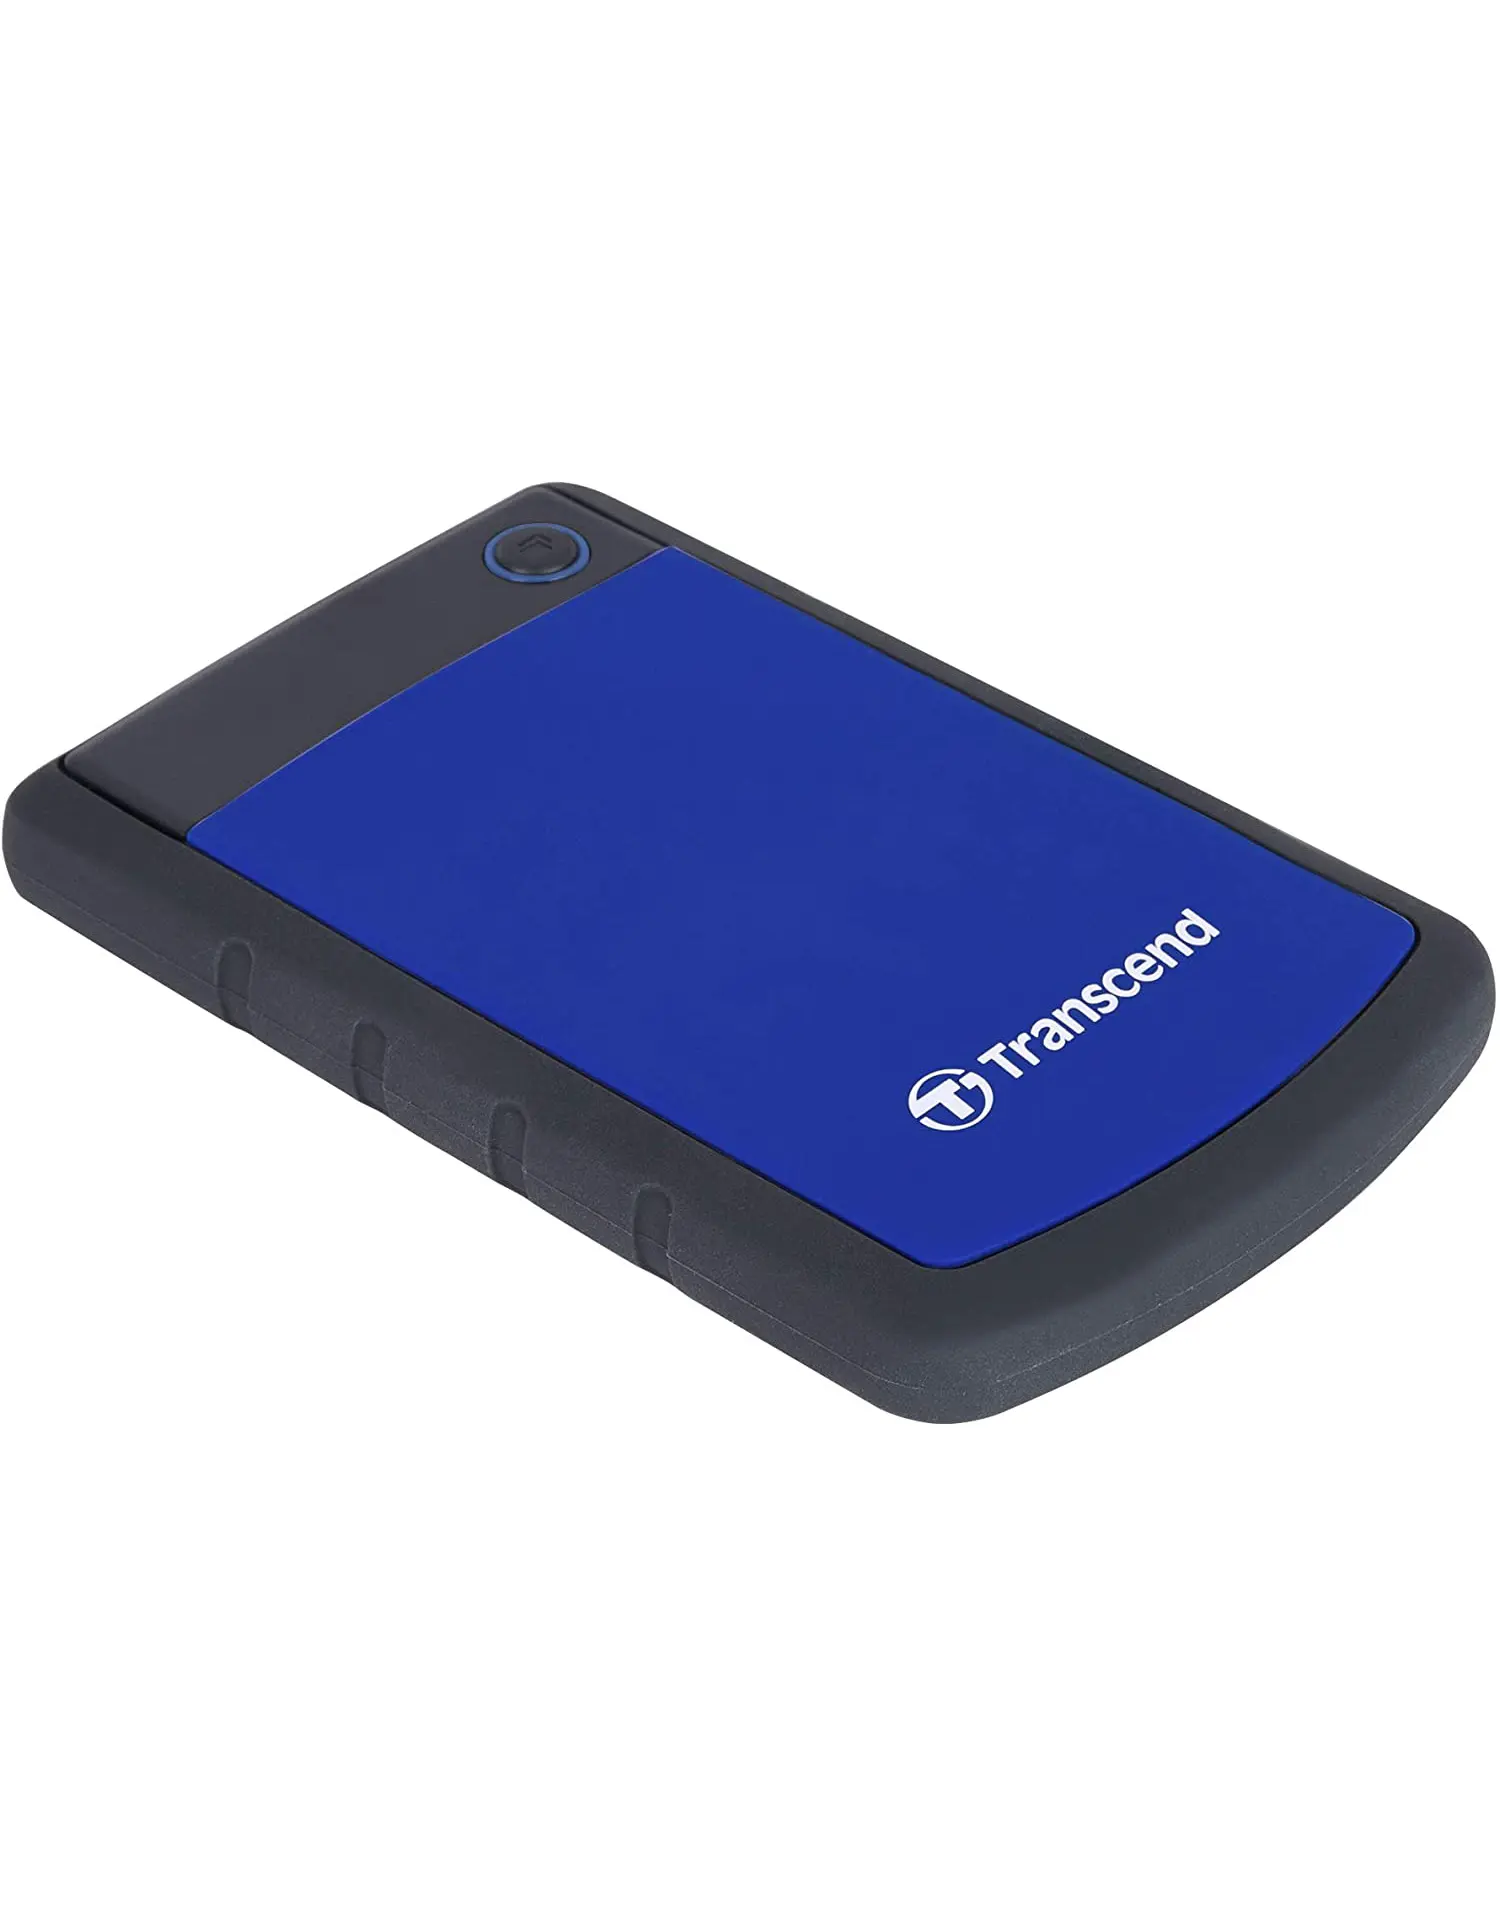 Transcend StoreJet 25h3 4TB Robust and Impact-Resistant External Hard Disk 2.5 " USB 3.0 for home and professional use